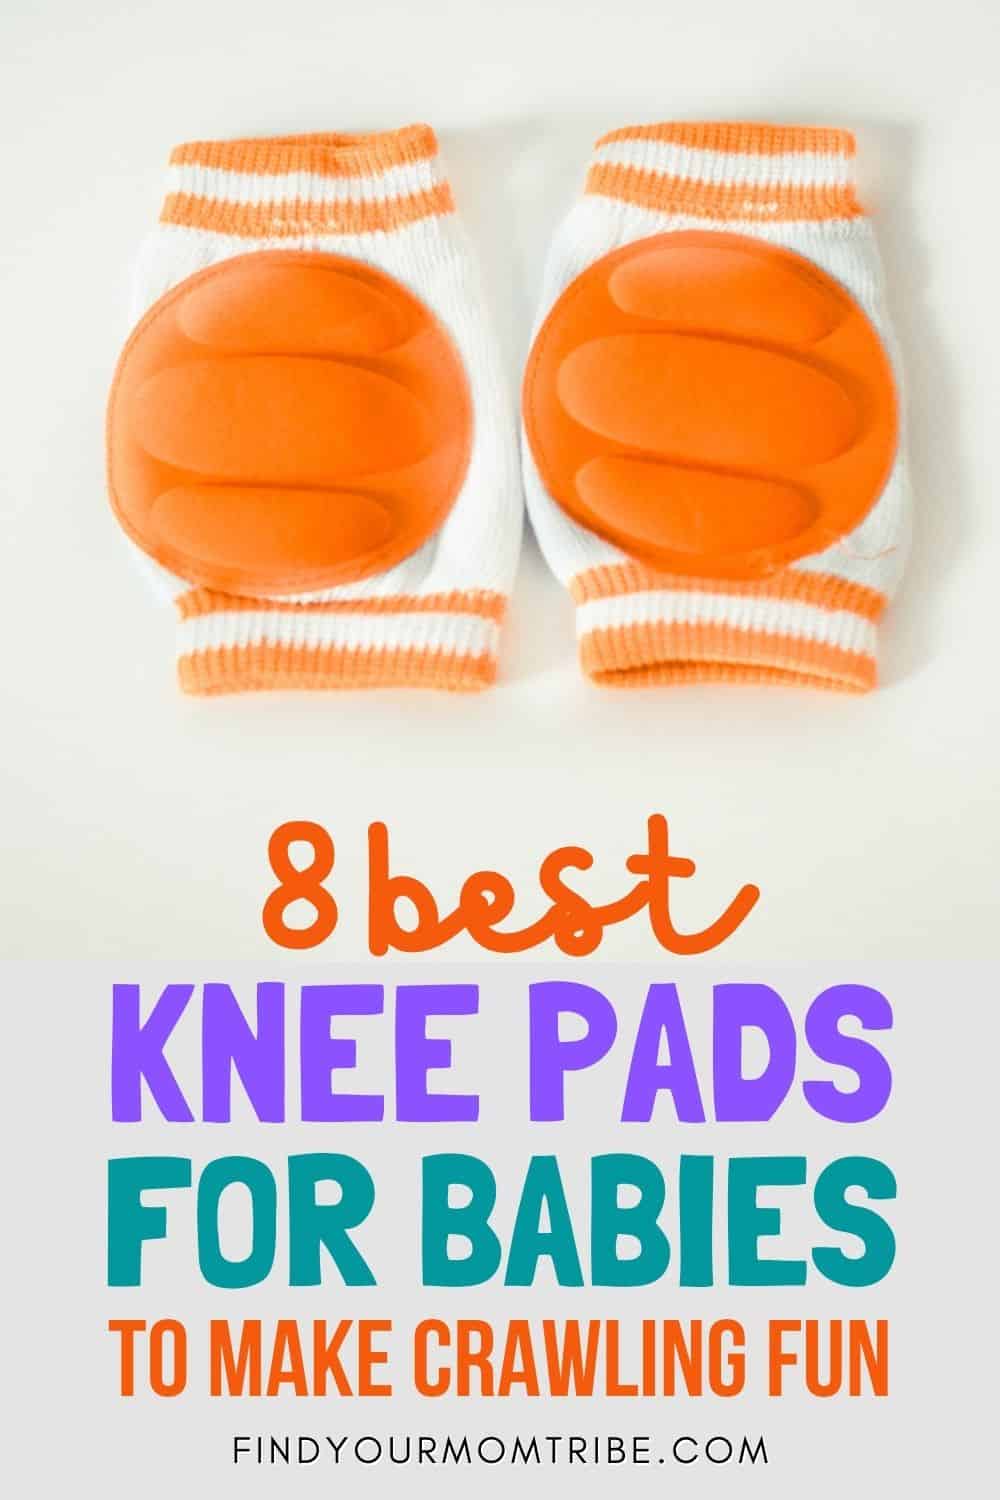 8 Best Knee Pads For Babies To Make Crawling Fun Pinterest